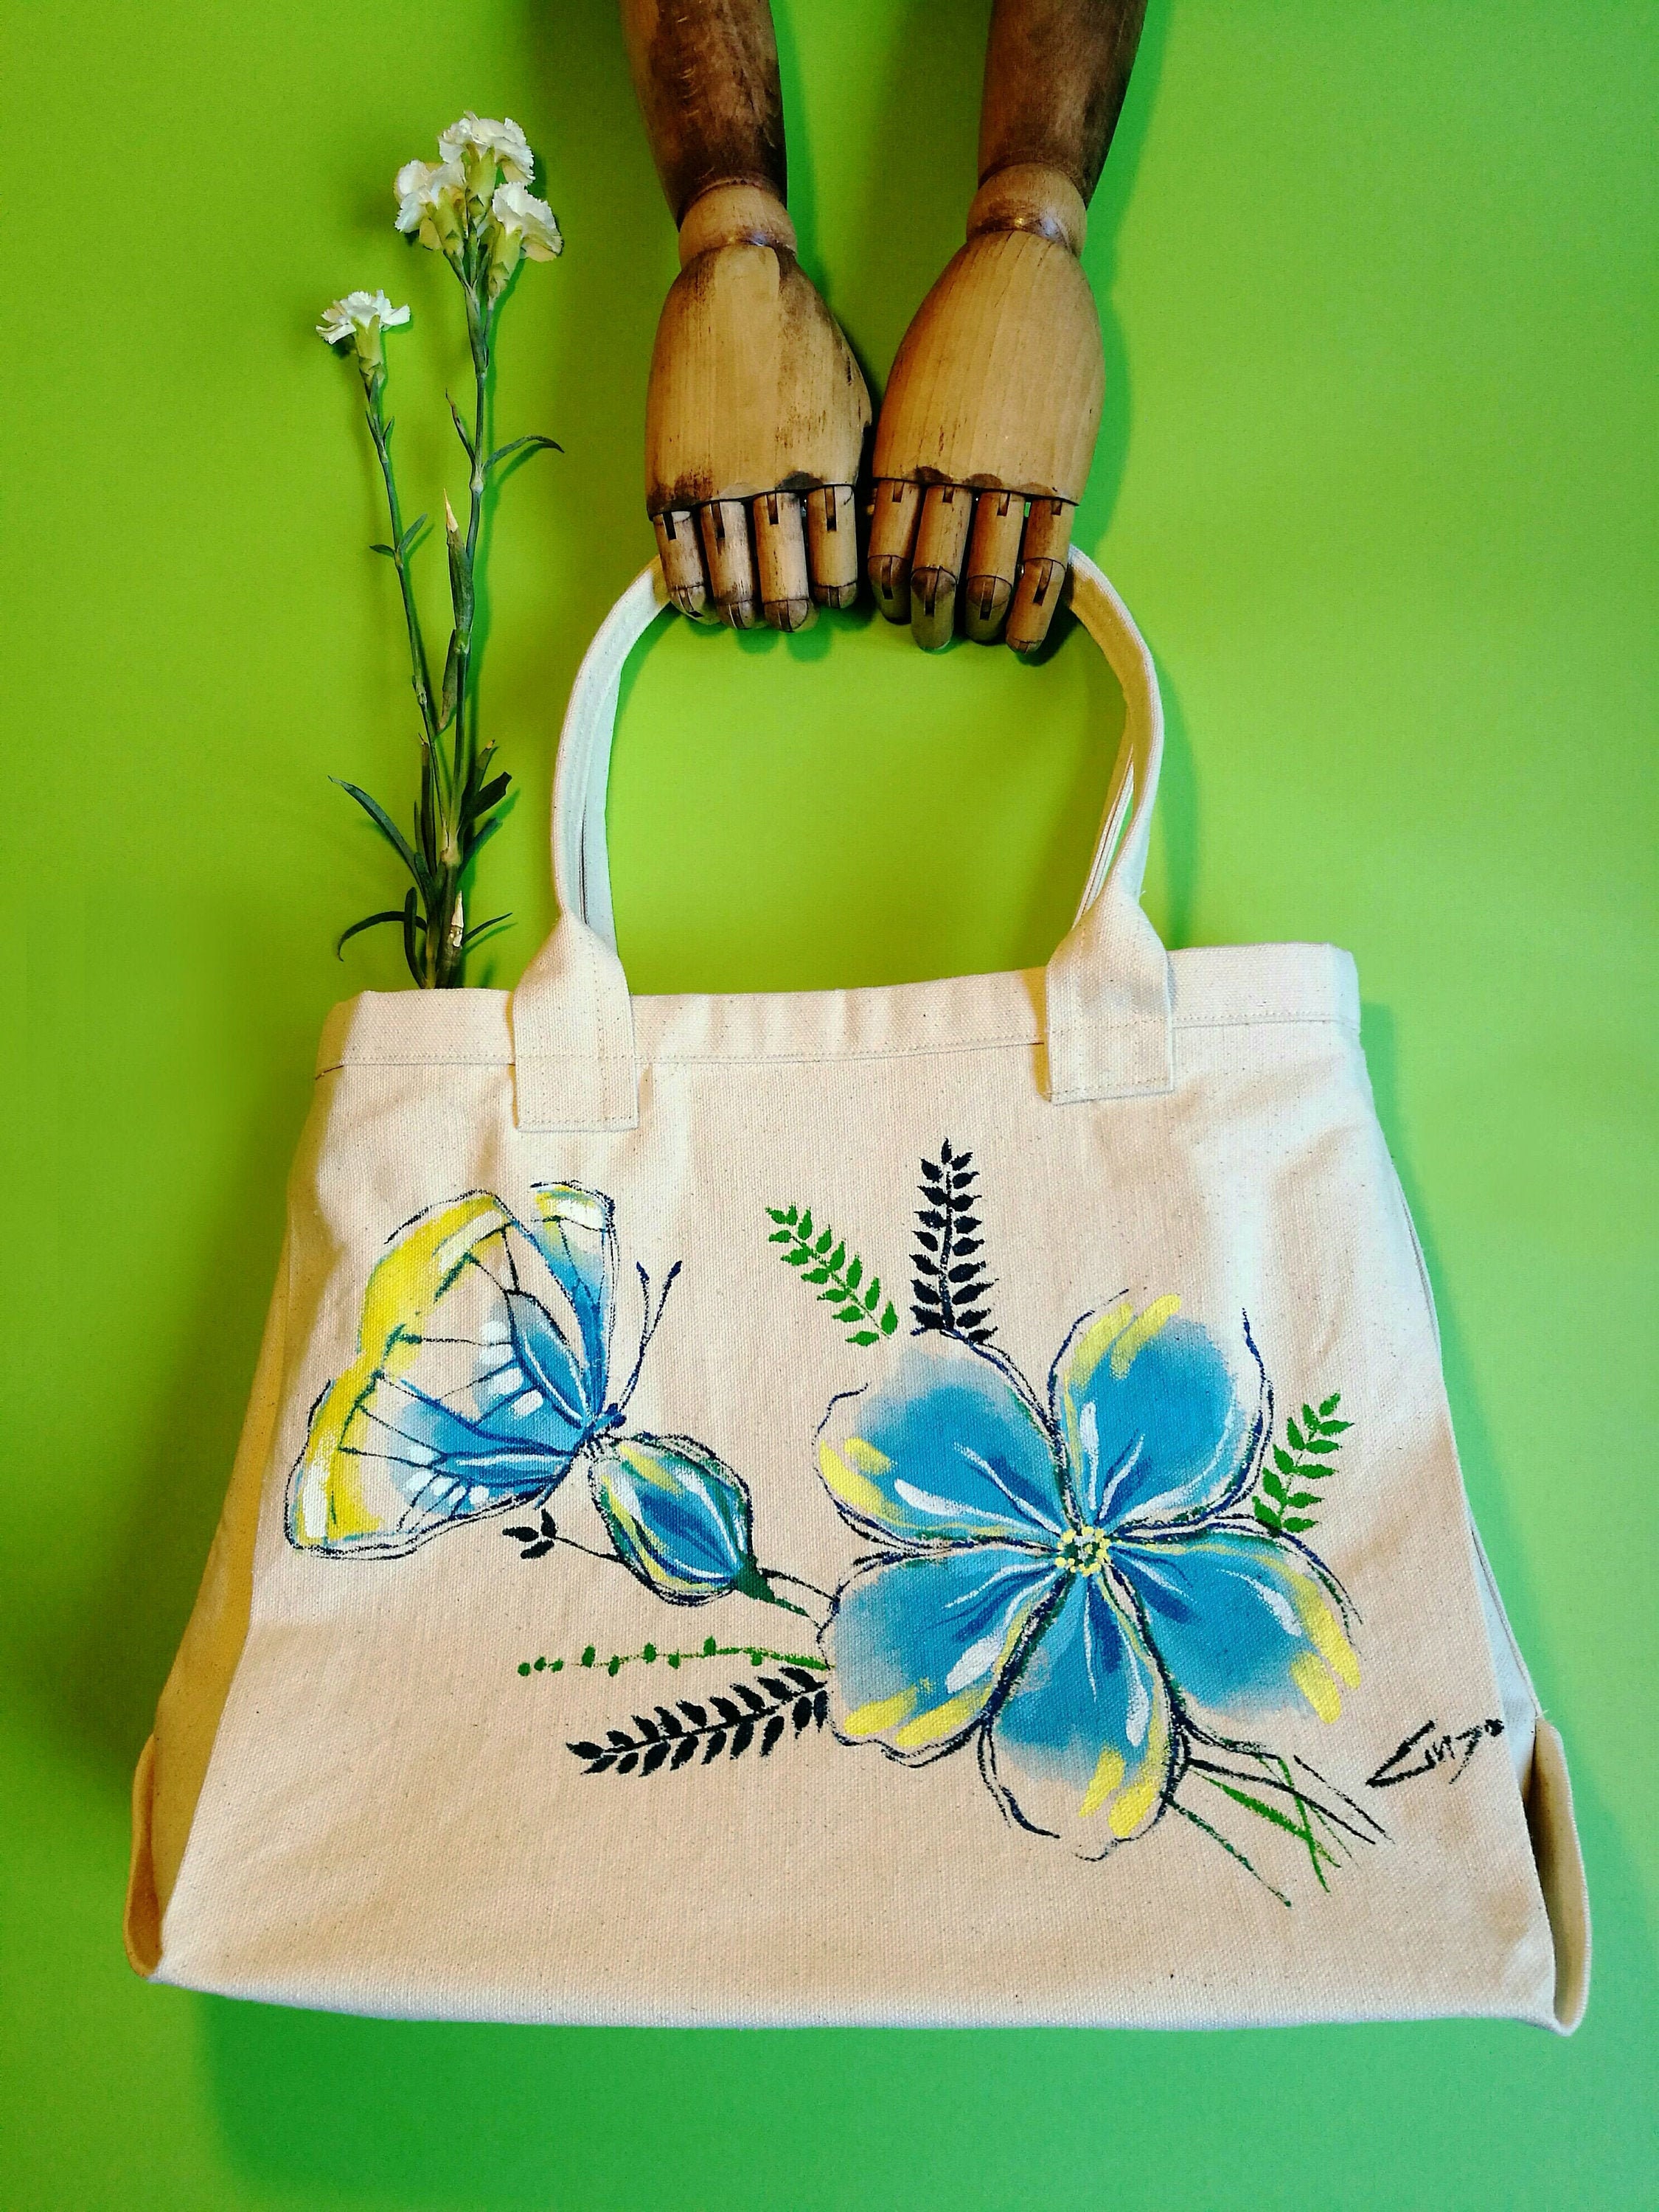 Your bag hand painted